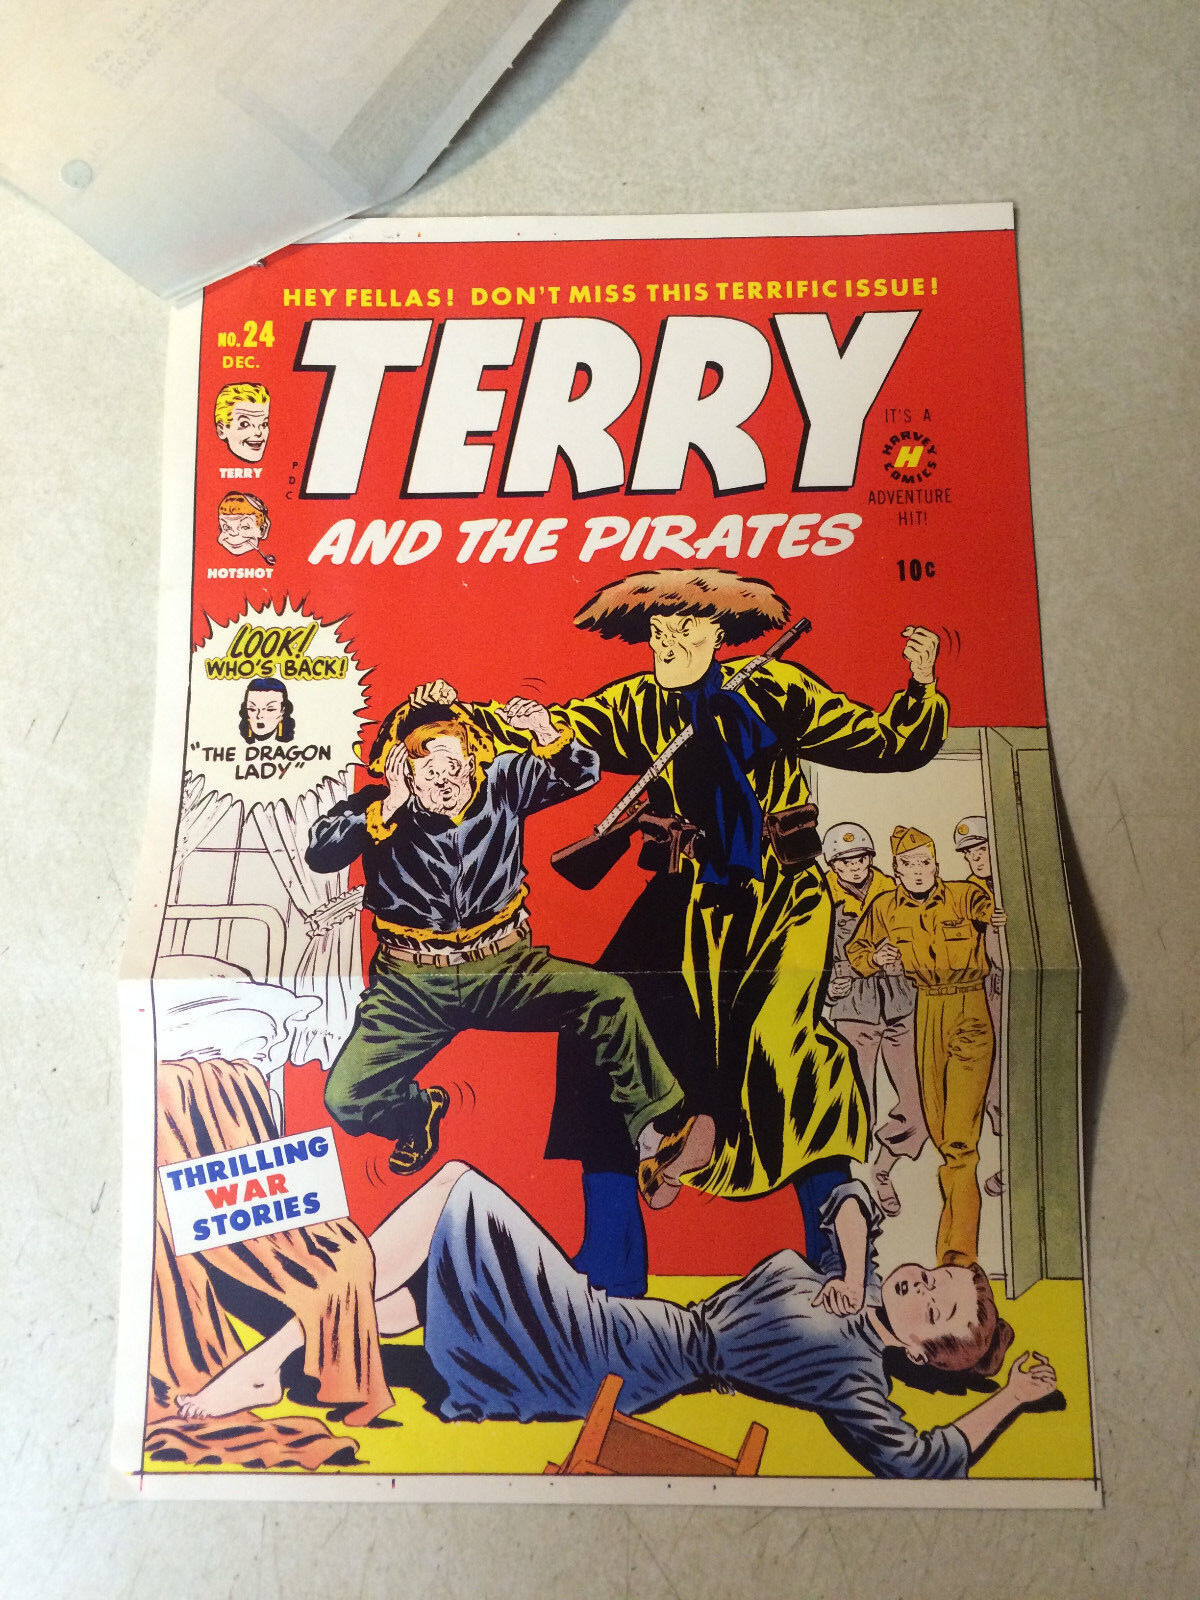 TERRY and the PIRATES #24 COVER ART original cover proof 1950 w/PRINTER INVOICE